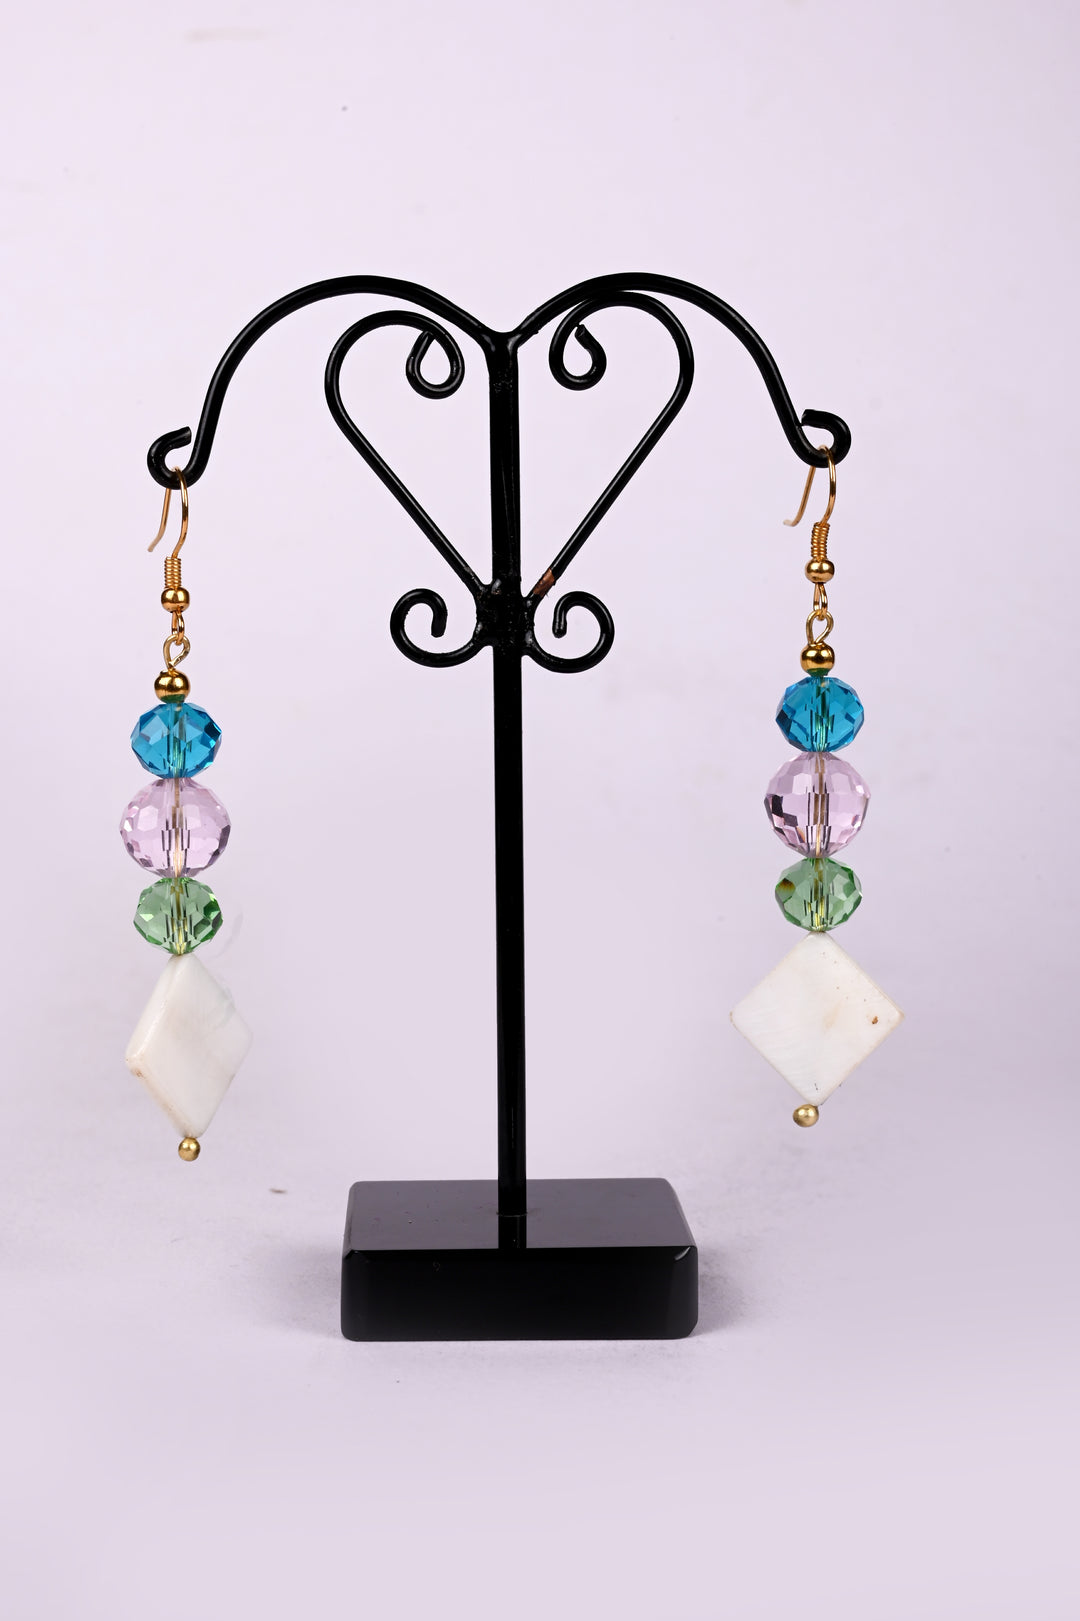 Beautiful Multi Faceted Glass Beads Earring Styled With Square Shaped Shell Beads